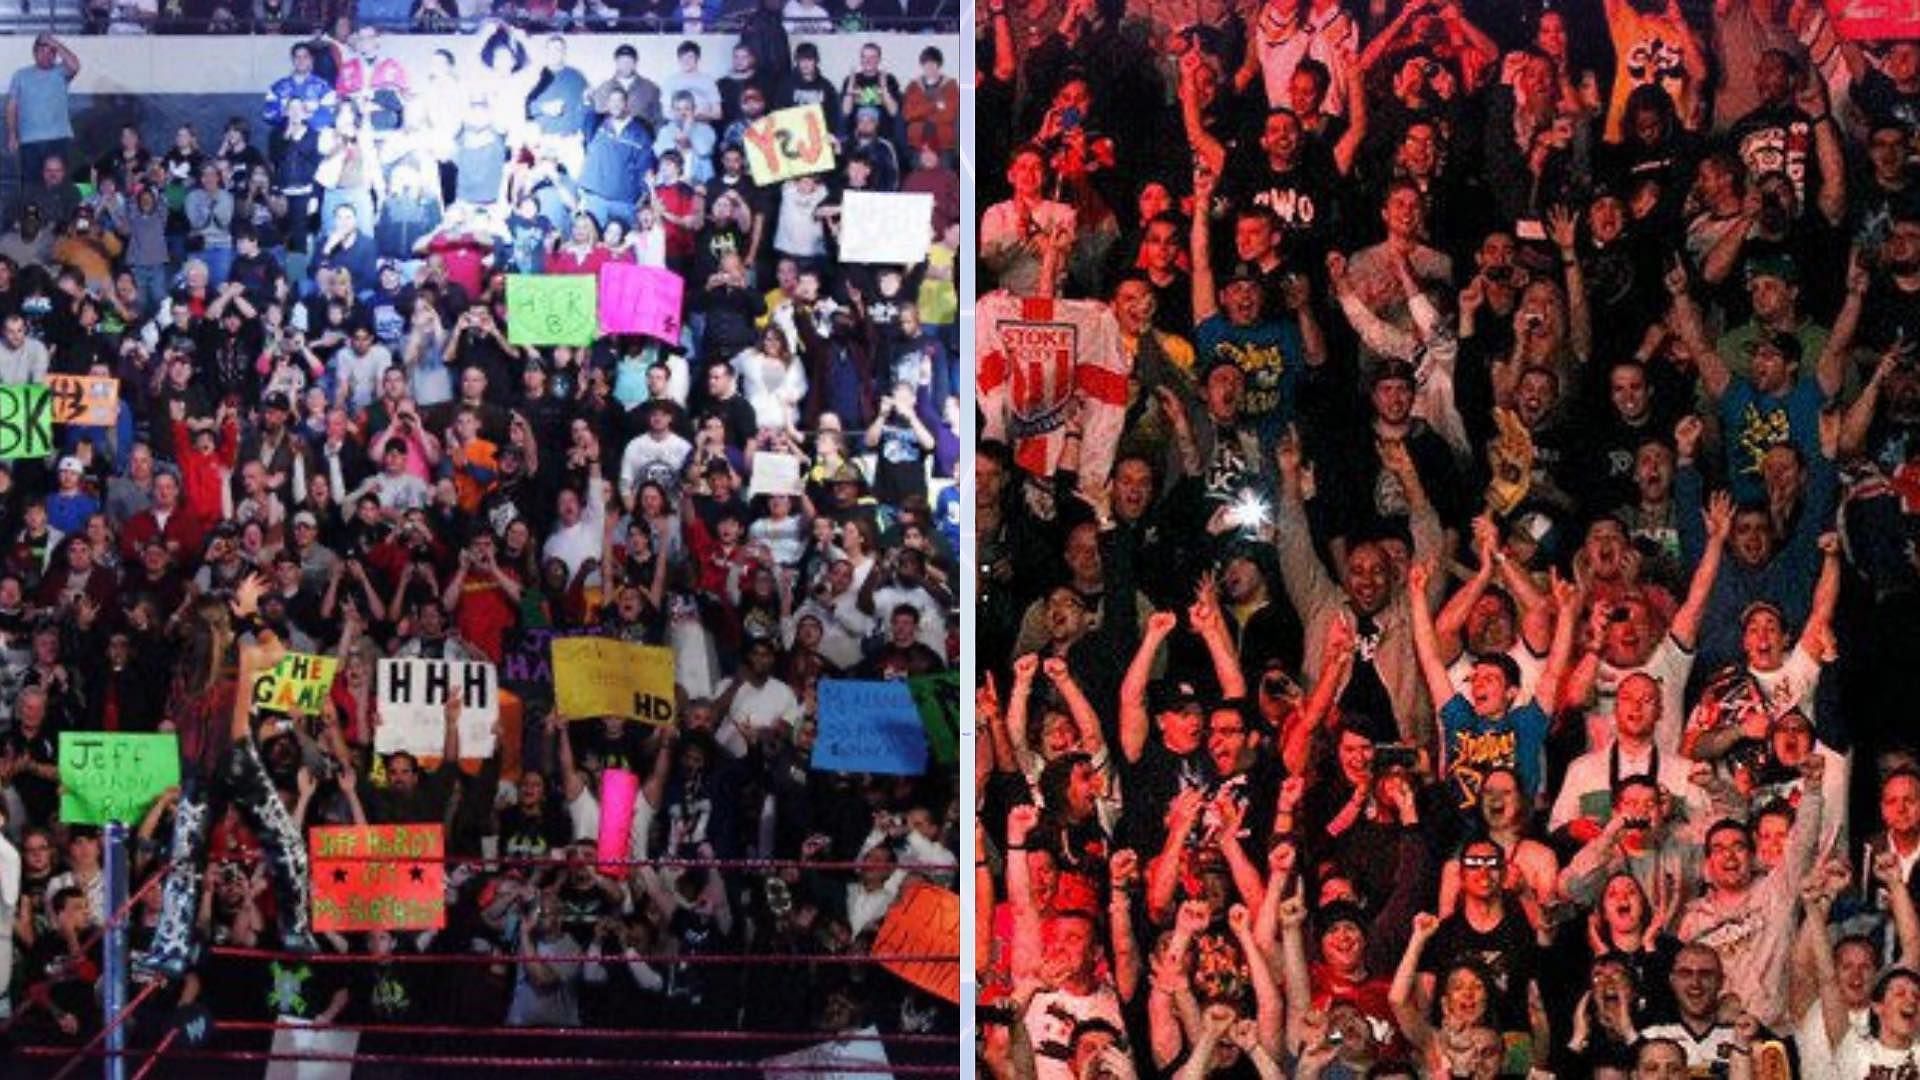 A shot of fans at a WWE event.